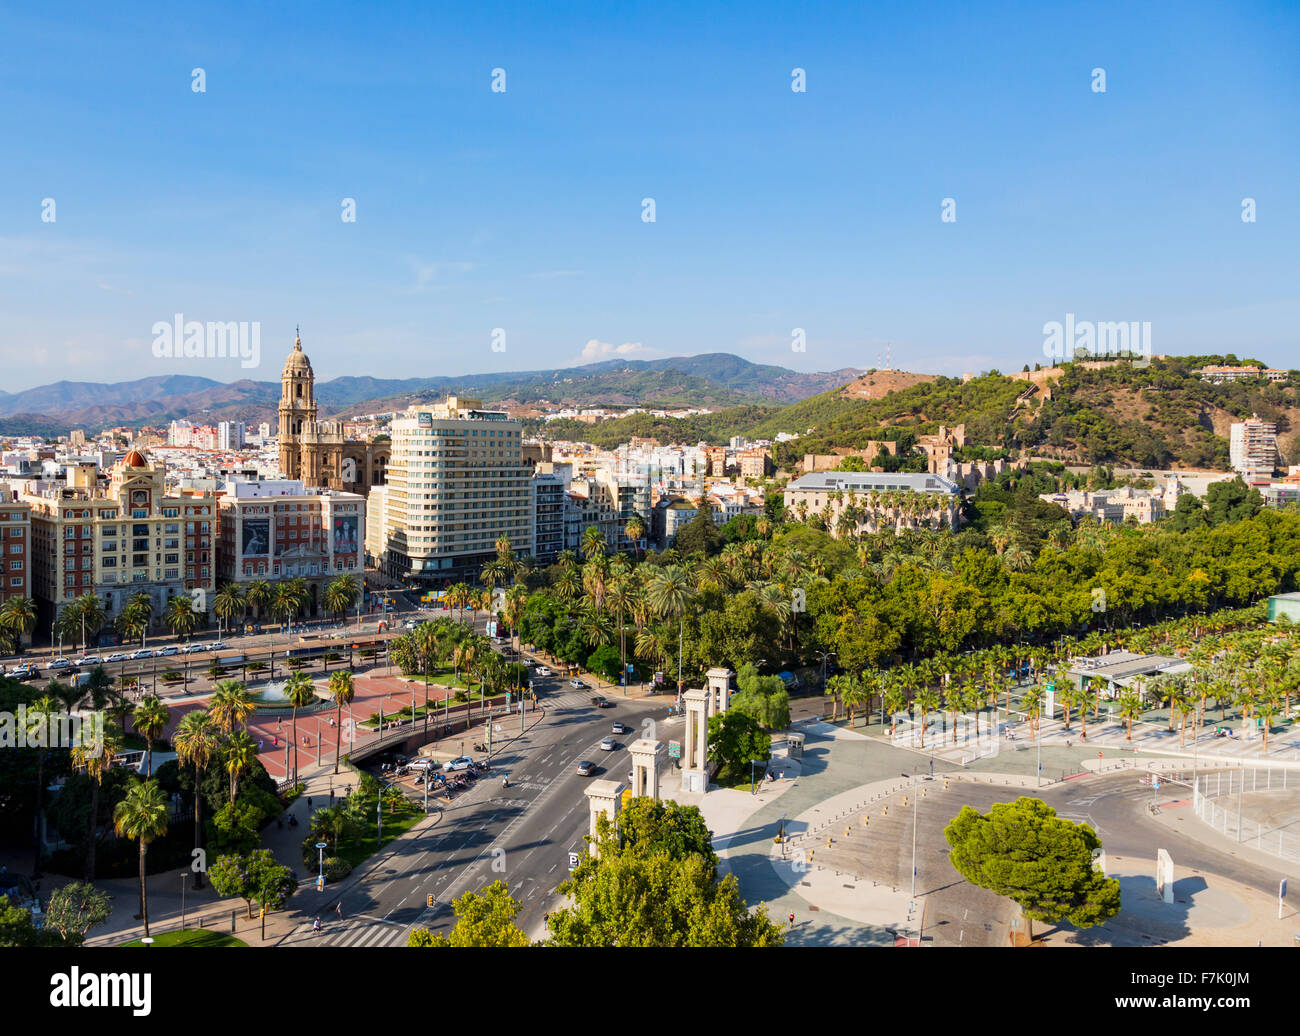 Malaga, Costa del Sol, Malaga Province, Andalusia, southern Spain. Left, tower of the cathedral. Stock Photo